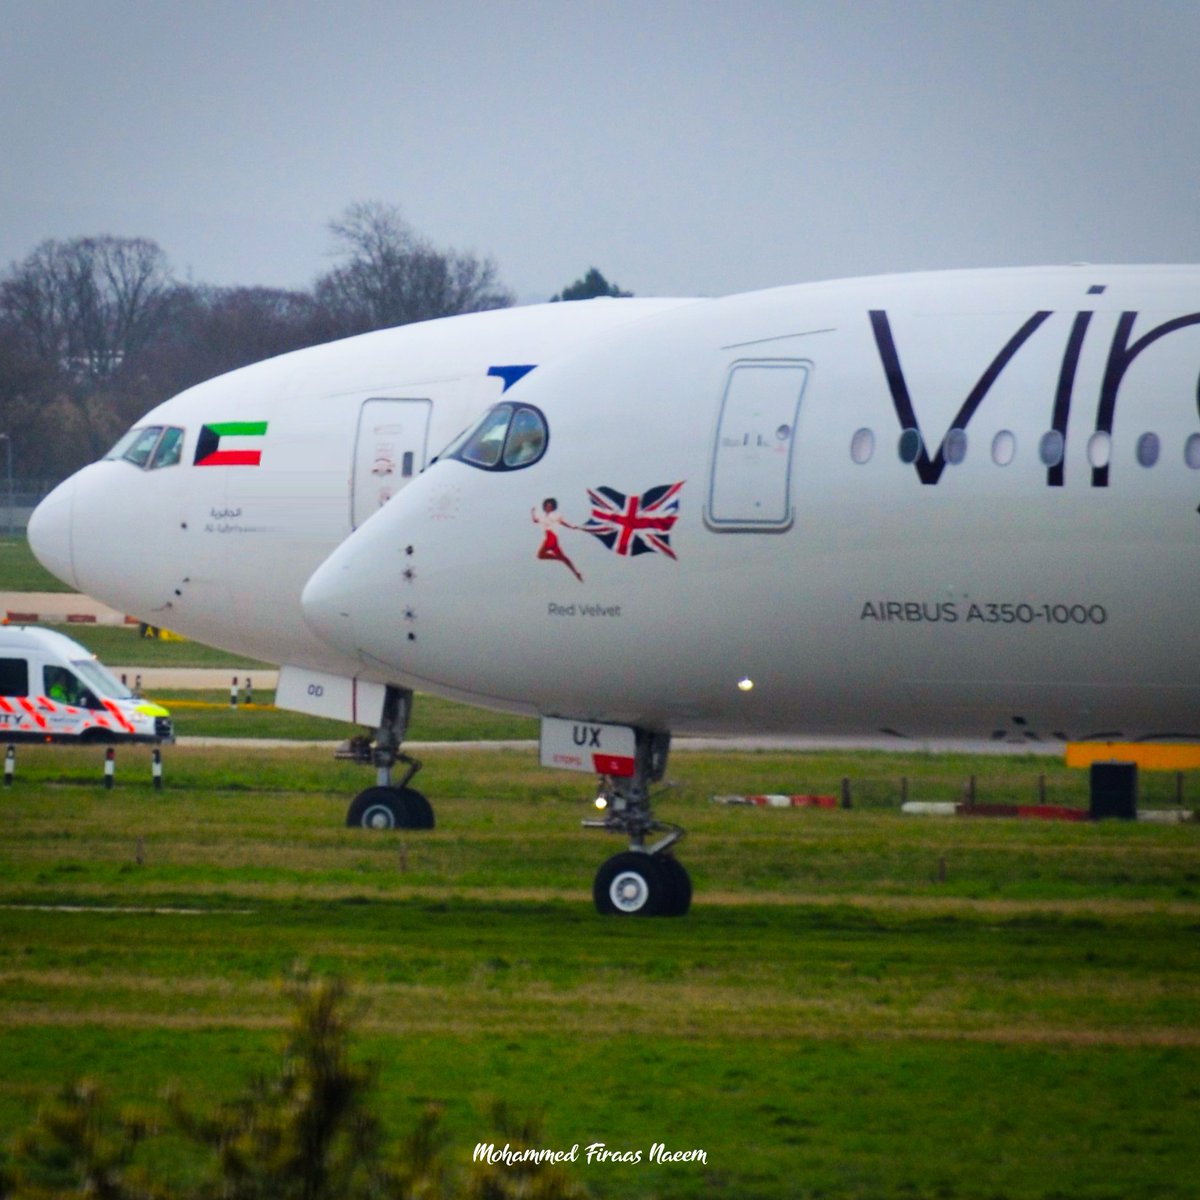 Do you prefer the Boeing 777 or Airbus A350? I cannot decide which aircraft I love more. I have flown on both of these aircraft and enjoyed them equally. Here I was able to photograph a Kuwait Airways B777-300ER and a Virgin Atlantic A350-1041 side by side at Heathrow Airport.